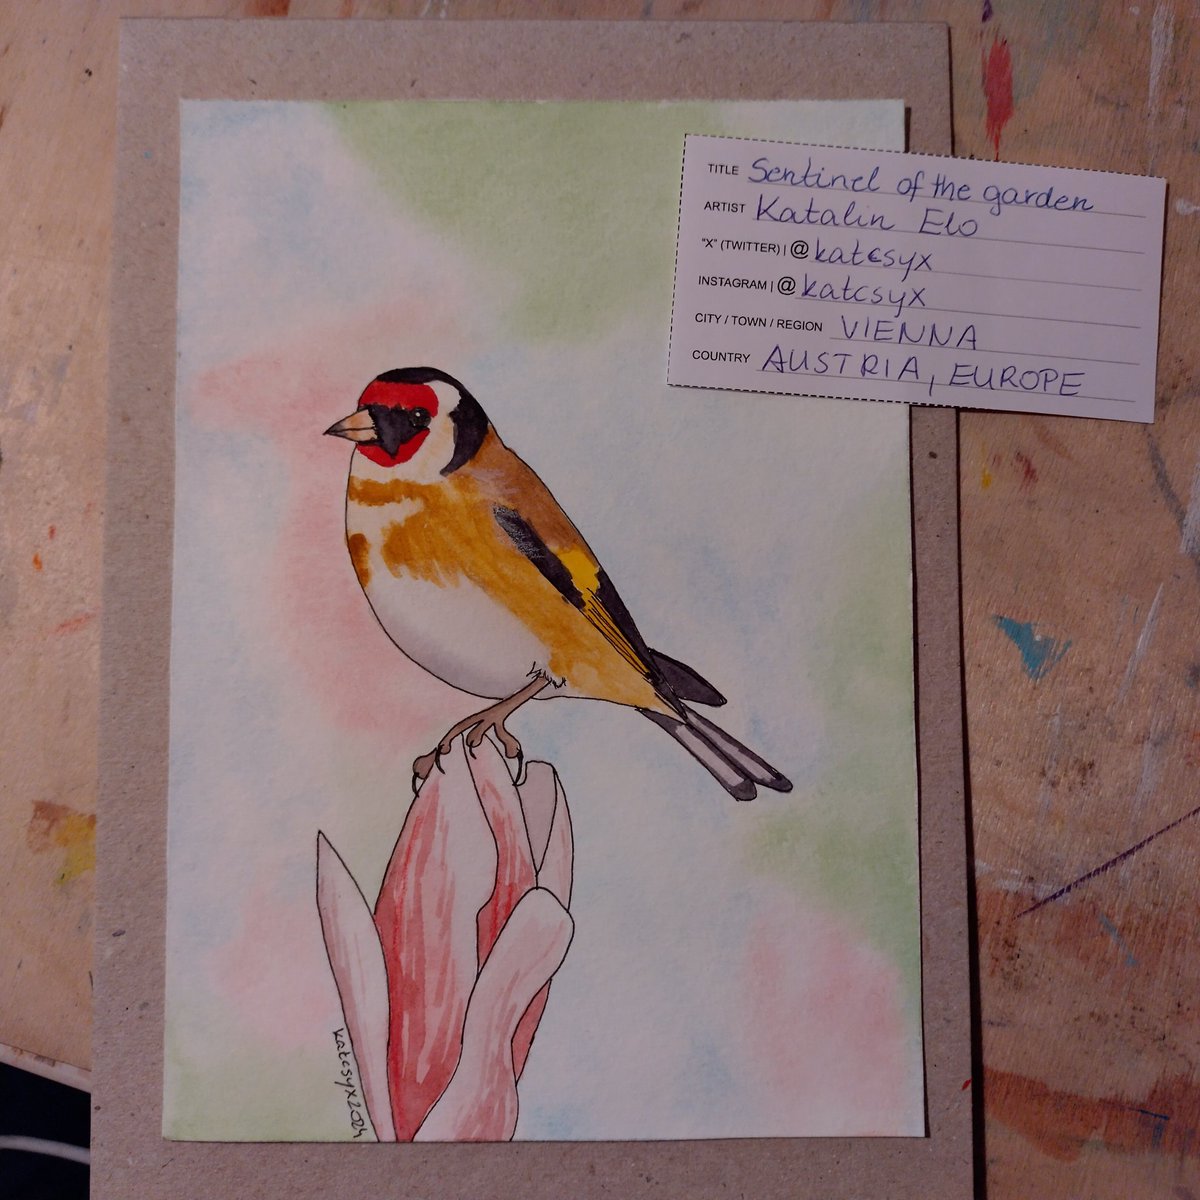 My piece for #postcardartexhibit24 for @millhousemckinney . 'Sentinel of the garden' is a cute little #goldfinch painted in #watercolour from a photo by the one and only @CarlBovisNature
@paeartforacause #artforacause 
#wildlifeart #naturelovers  #birdart  #postcardartexhibit